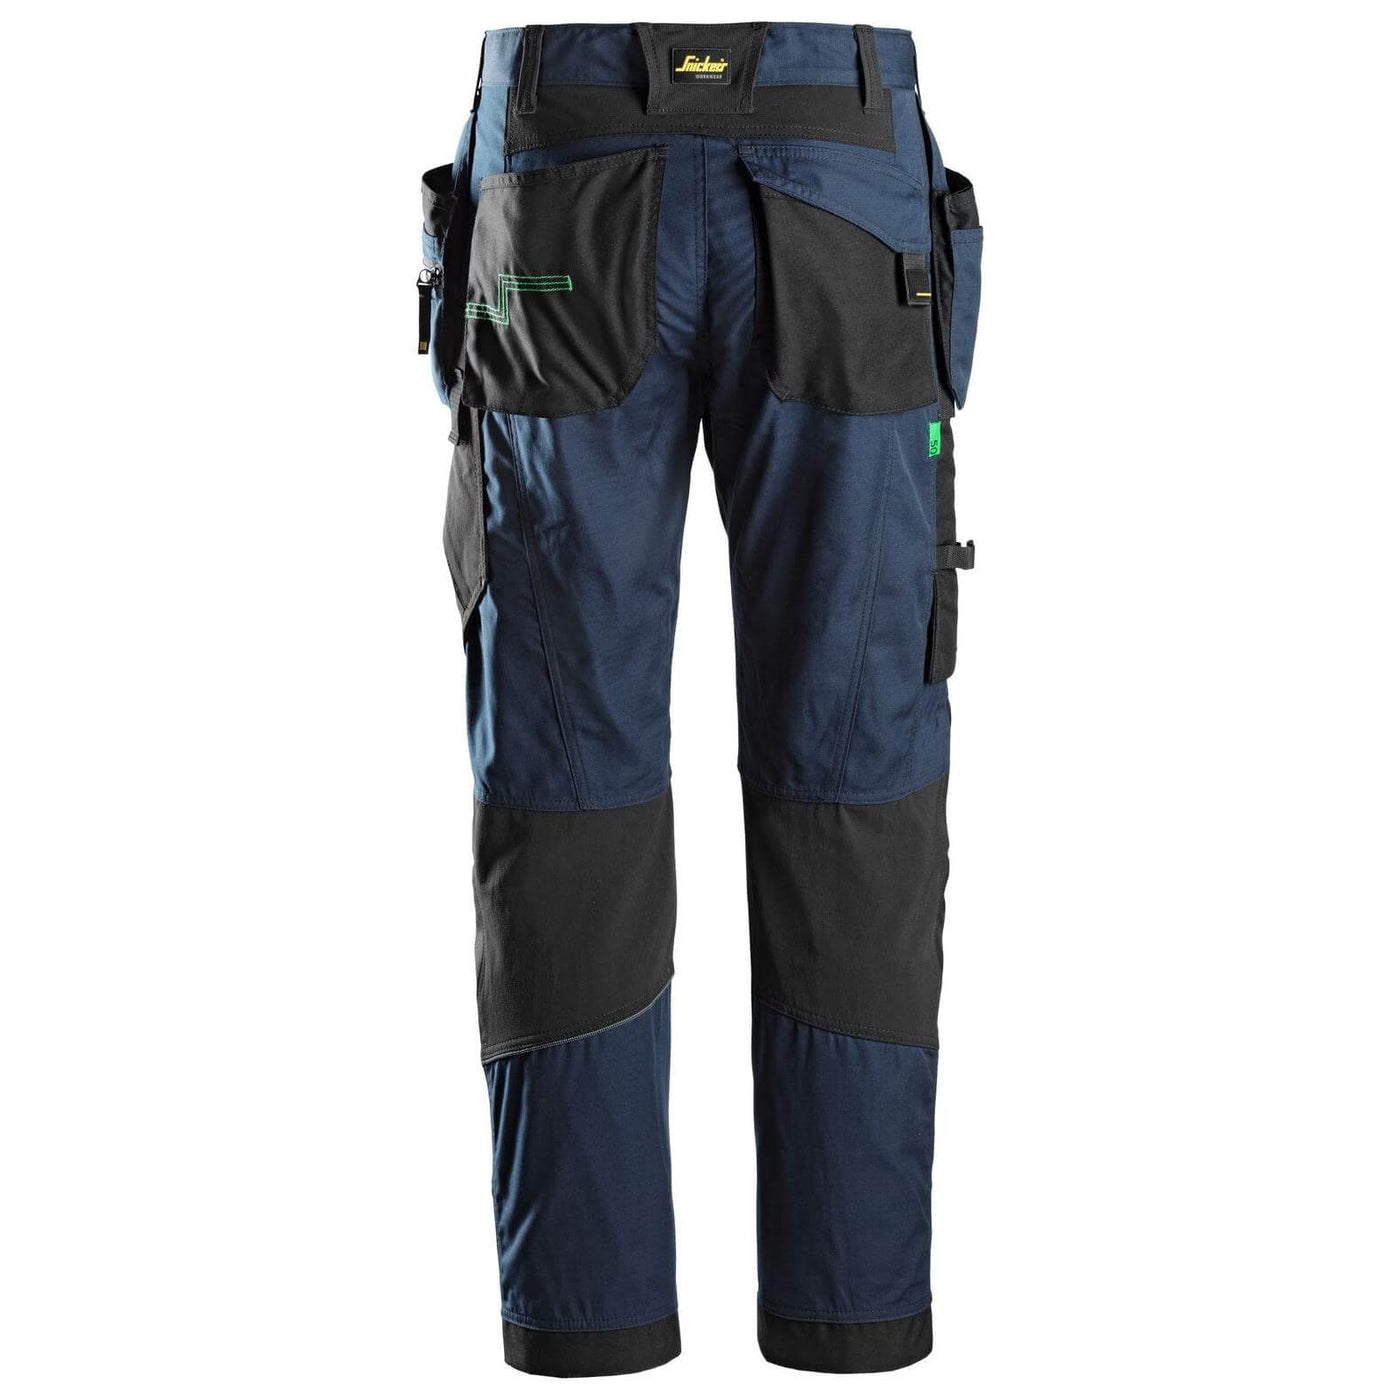 Snickers 6902 FlexiWork Lightweight Work Trousers with Holster Pockets Navy Black back #colour_navy-black